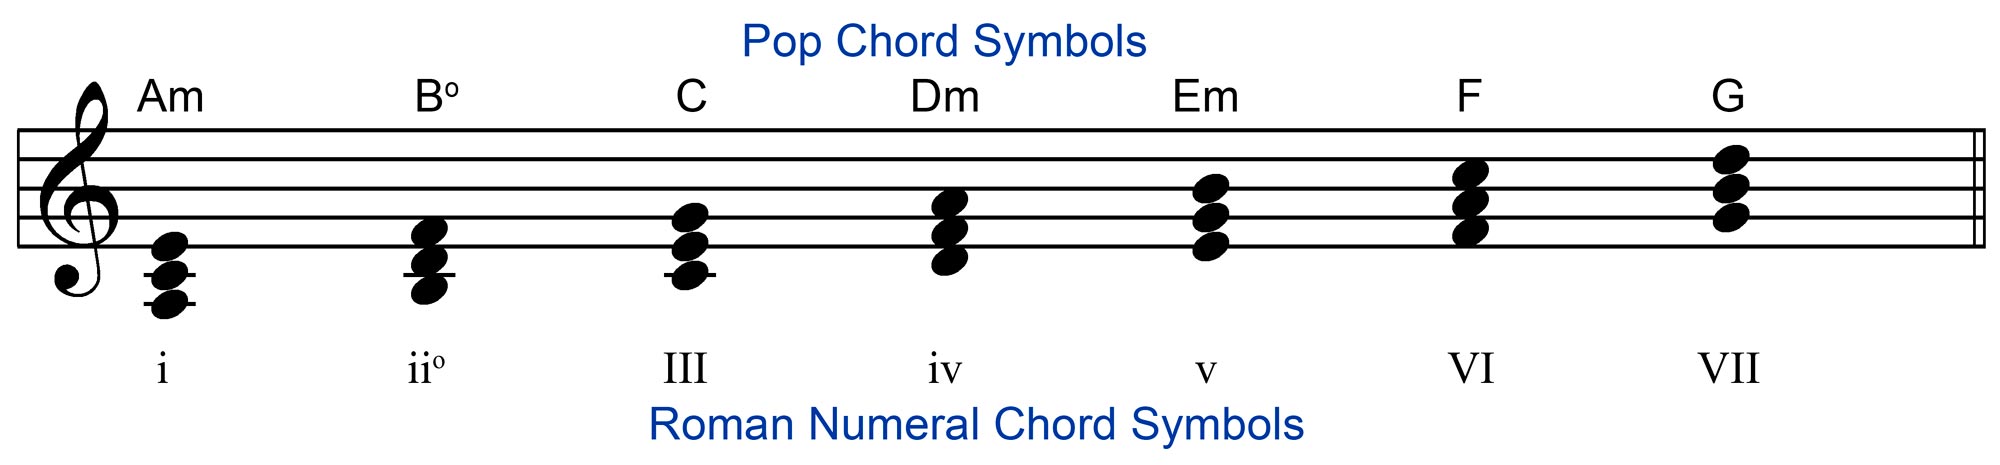 Diatonic Chords in the Key of A Natural Minor